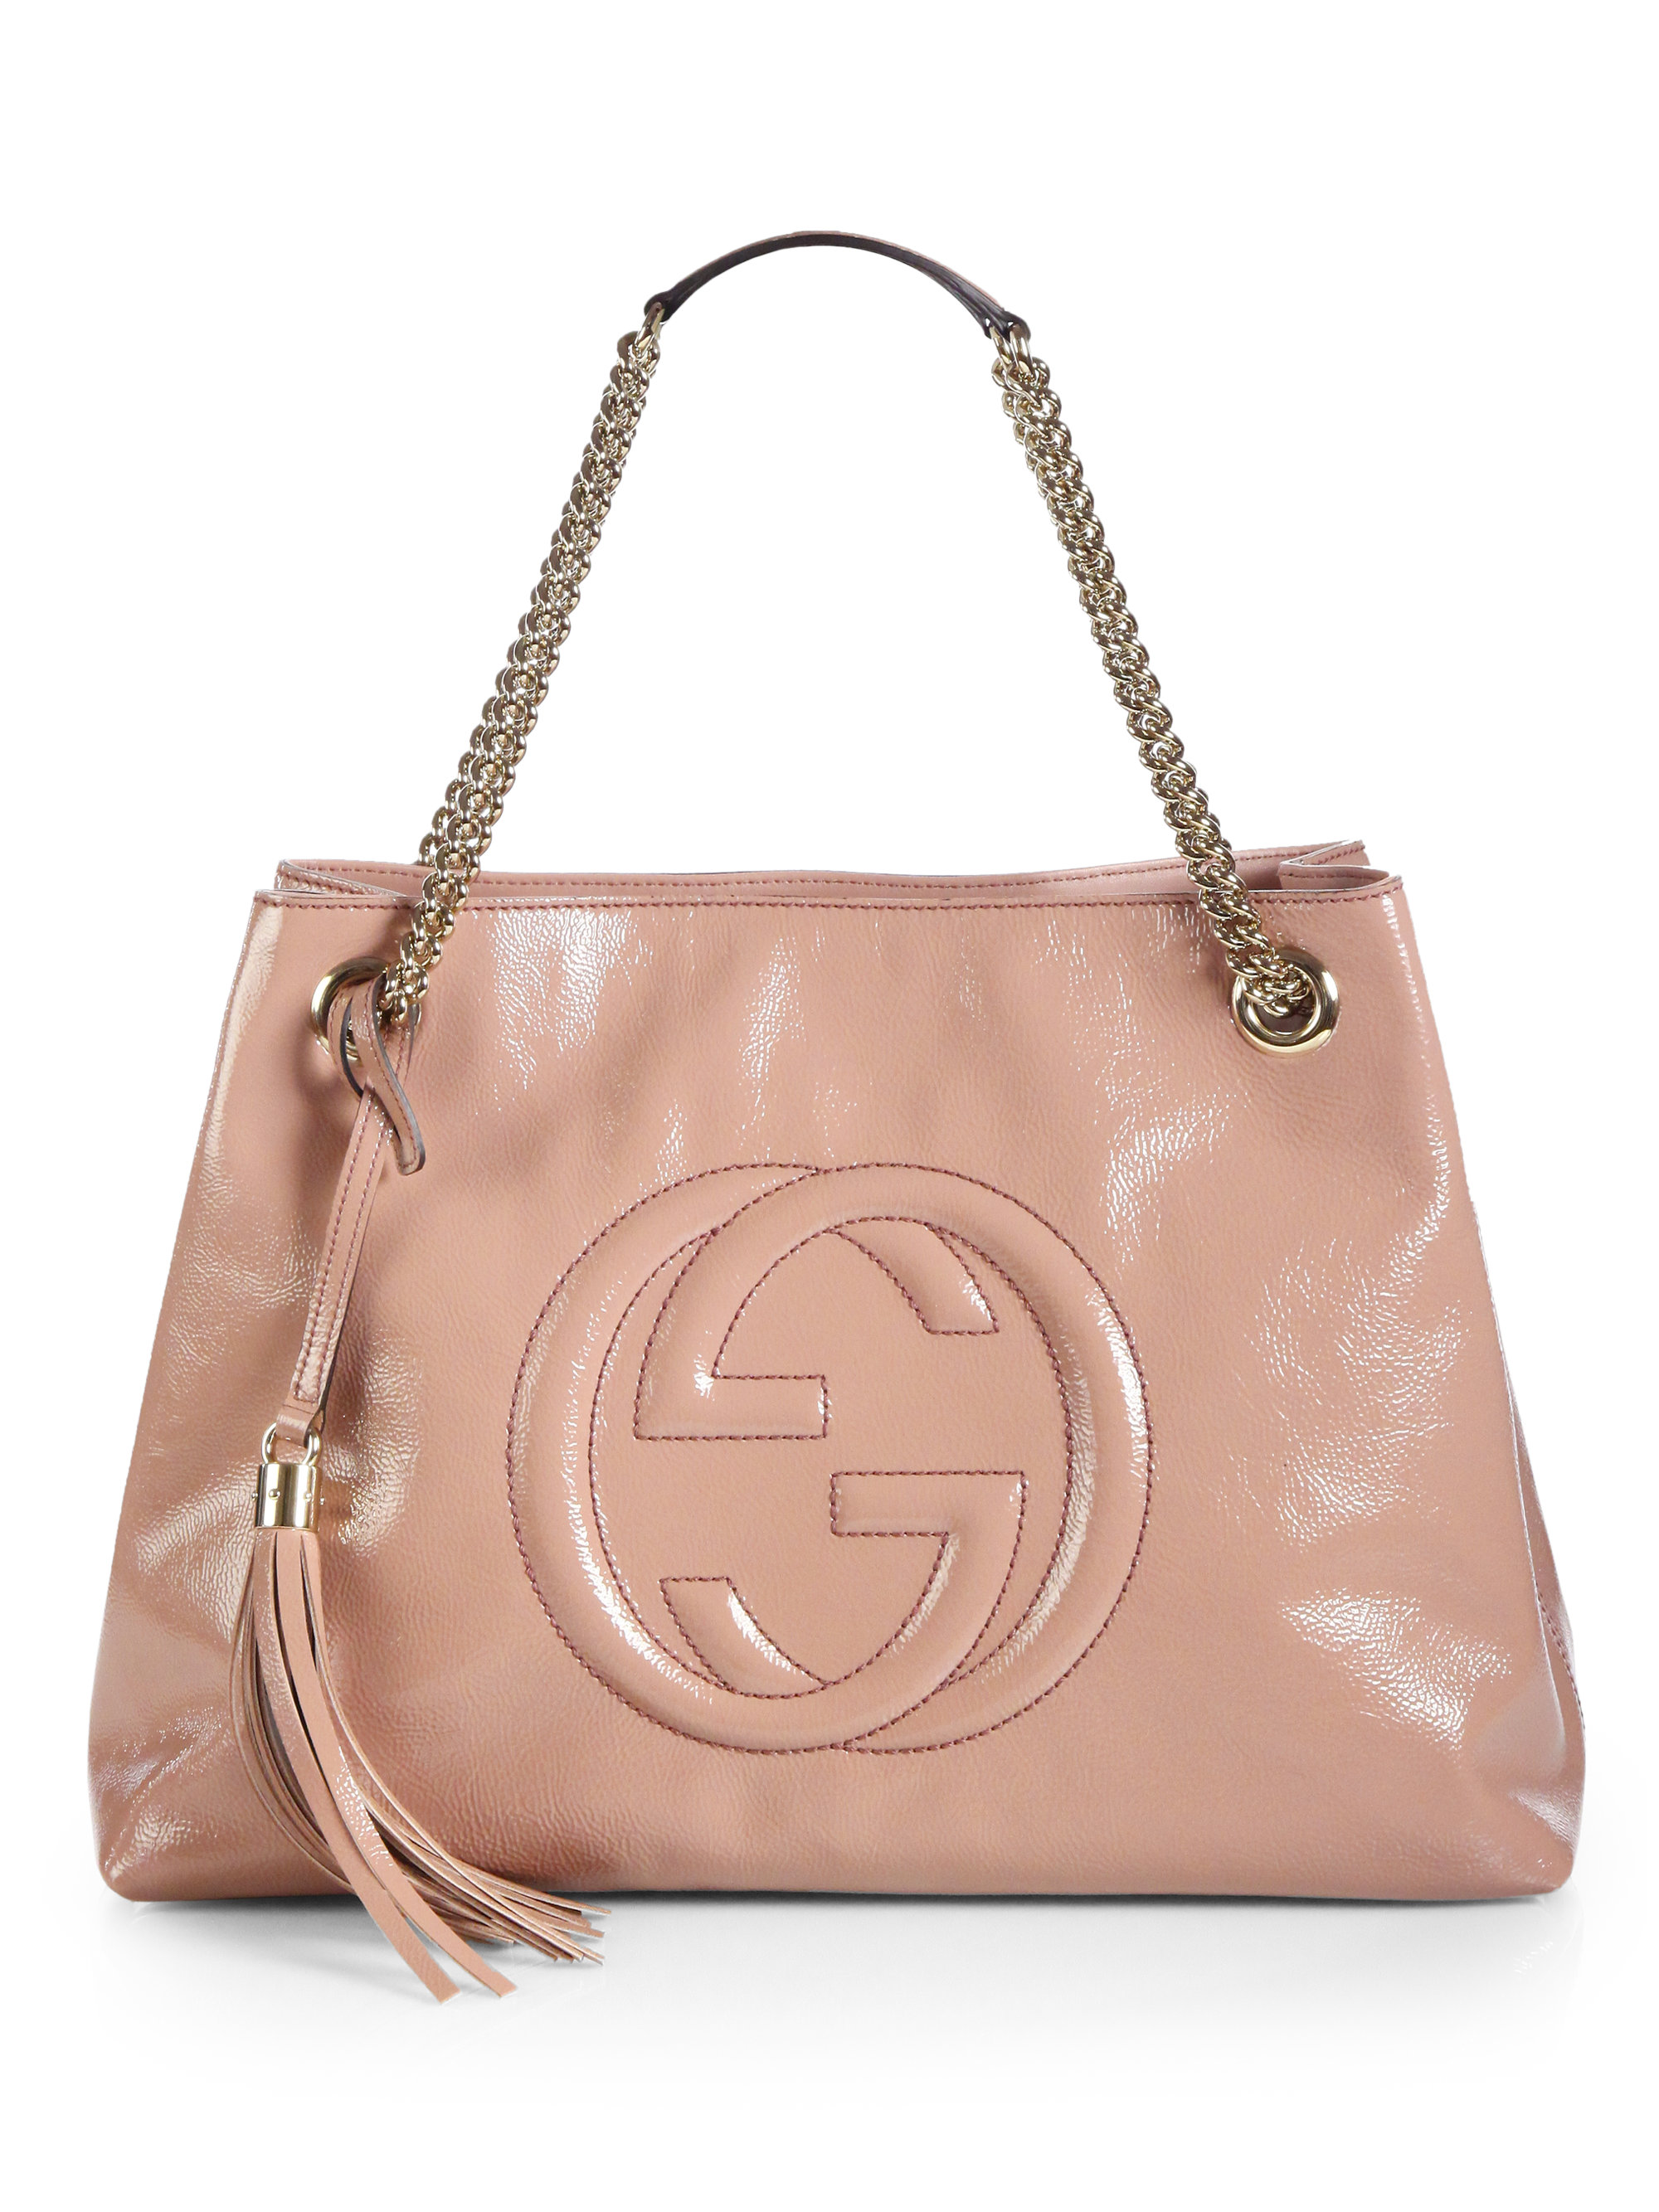 Lyst - Gucci Soho Patent Leather Shoulder Bag in Pink